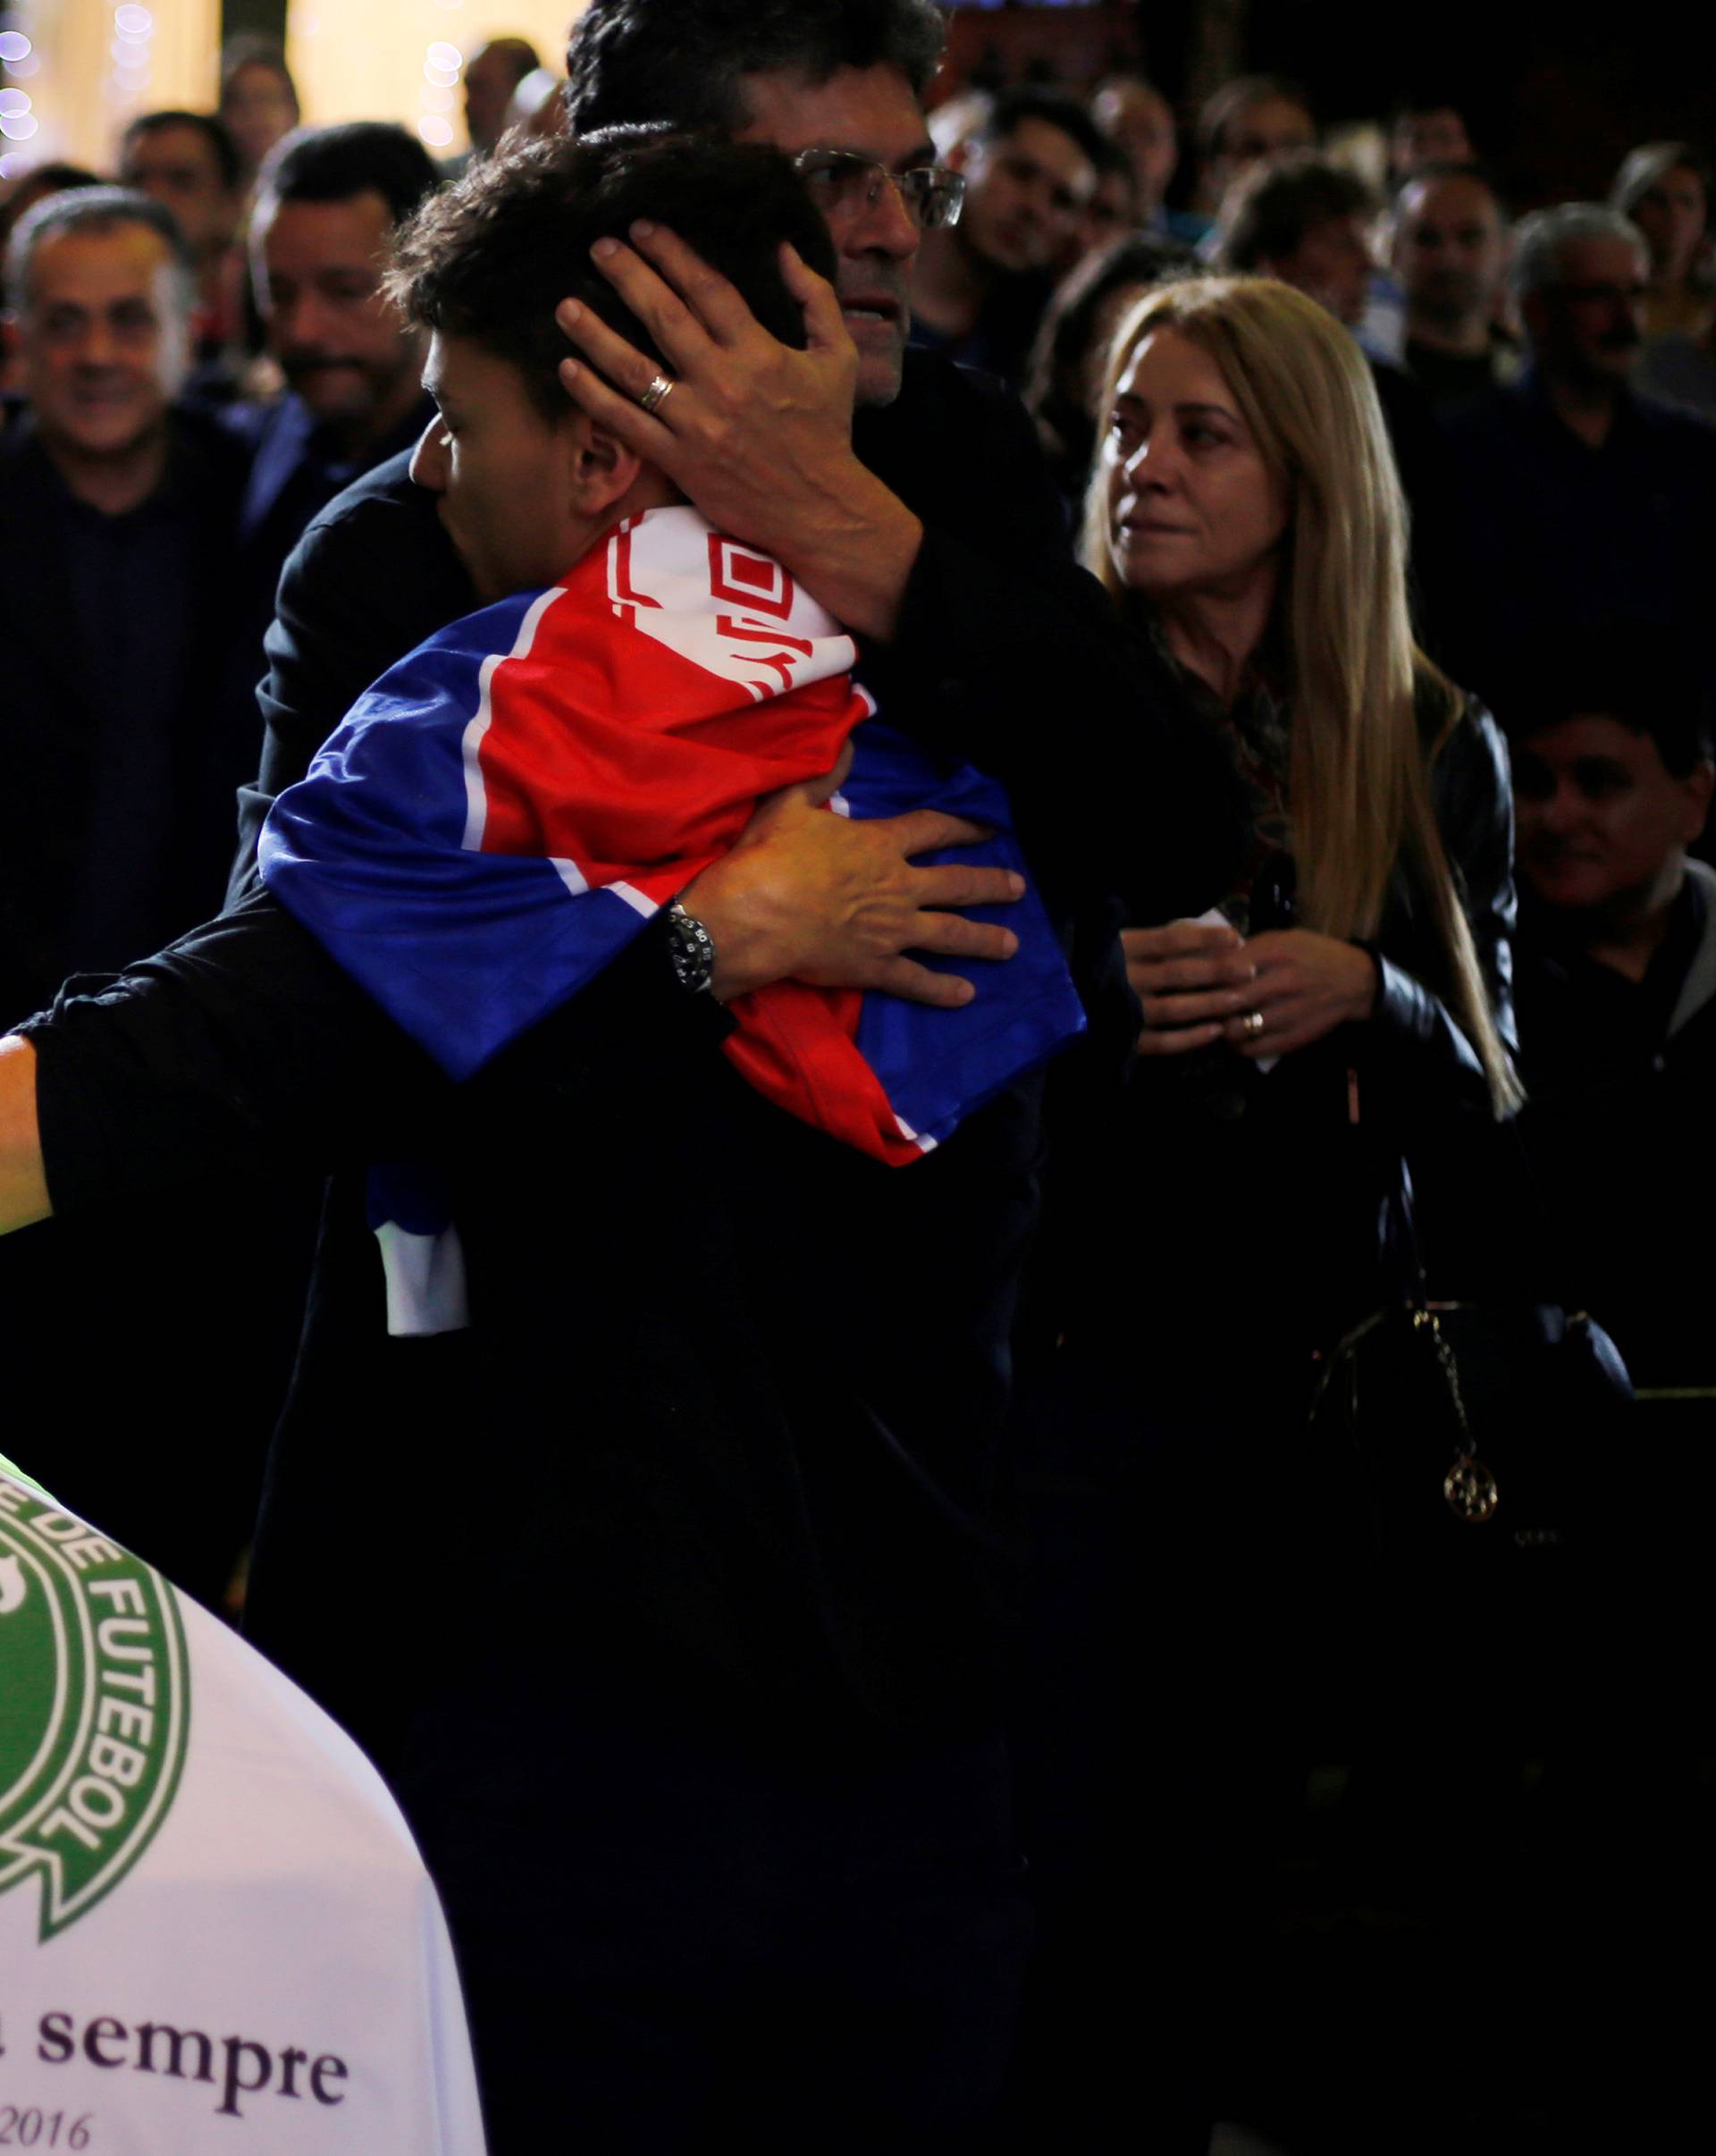 Relatives of Chapecoense soccer club head coach Caio Junior, who died in the plane crash in Colombia, participate in a ceremony to pay tribute to him in Curitiba